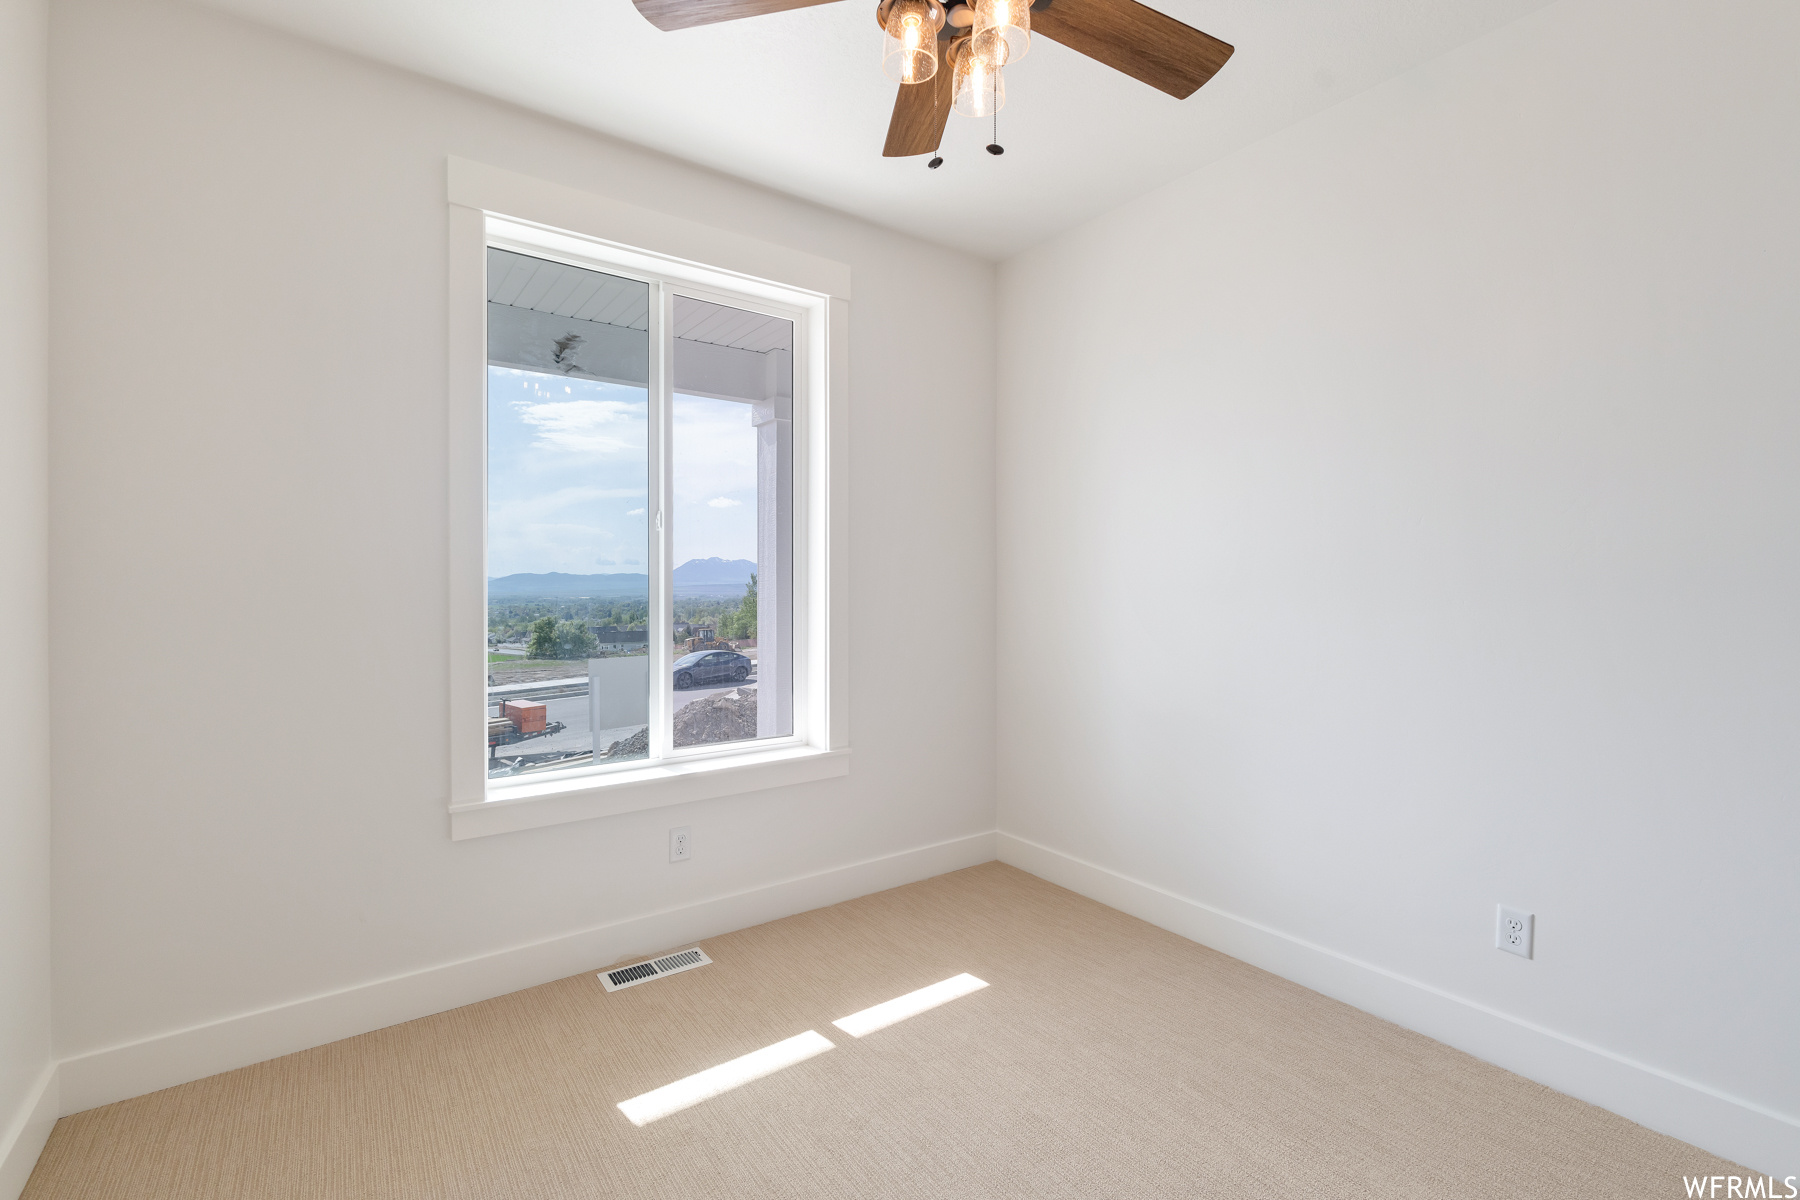 Carpeted empty room with natural light and a ceiling fan